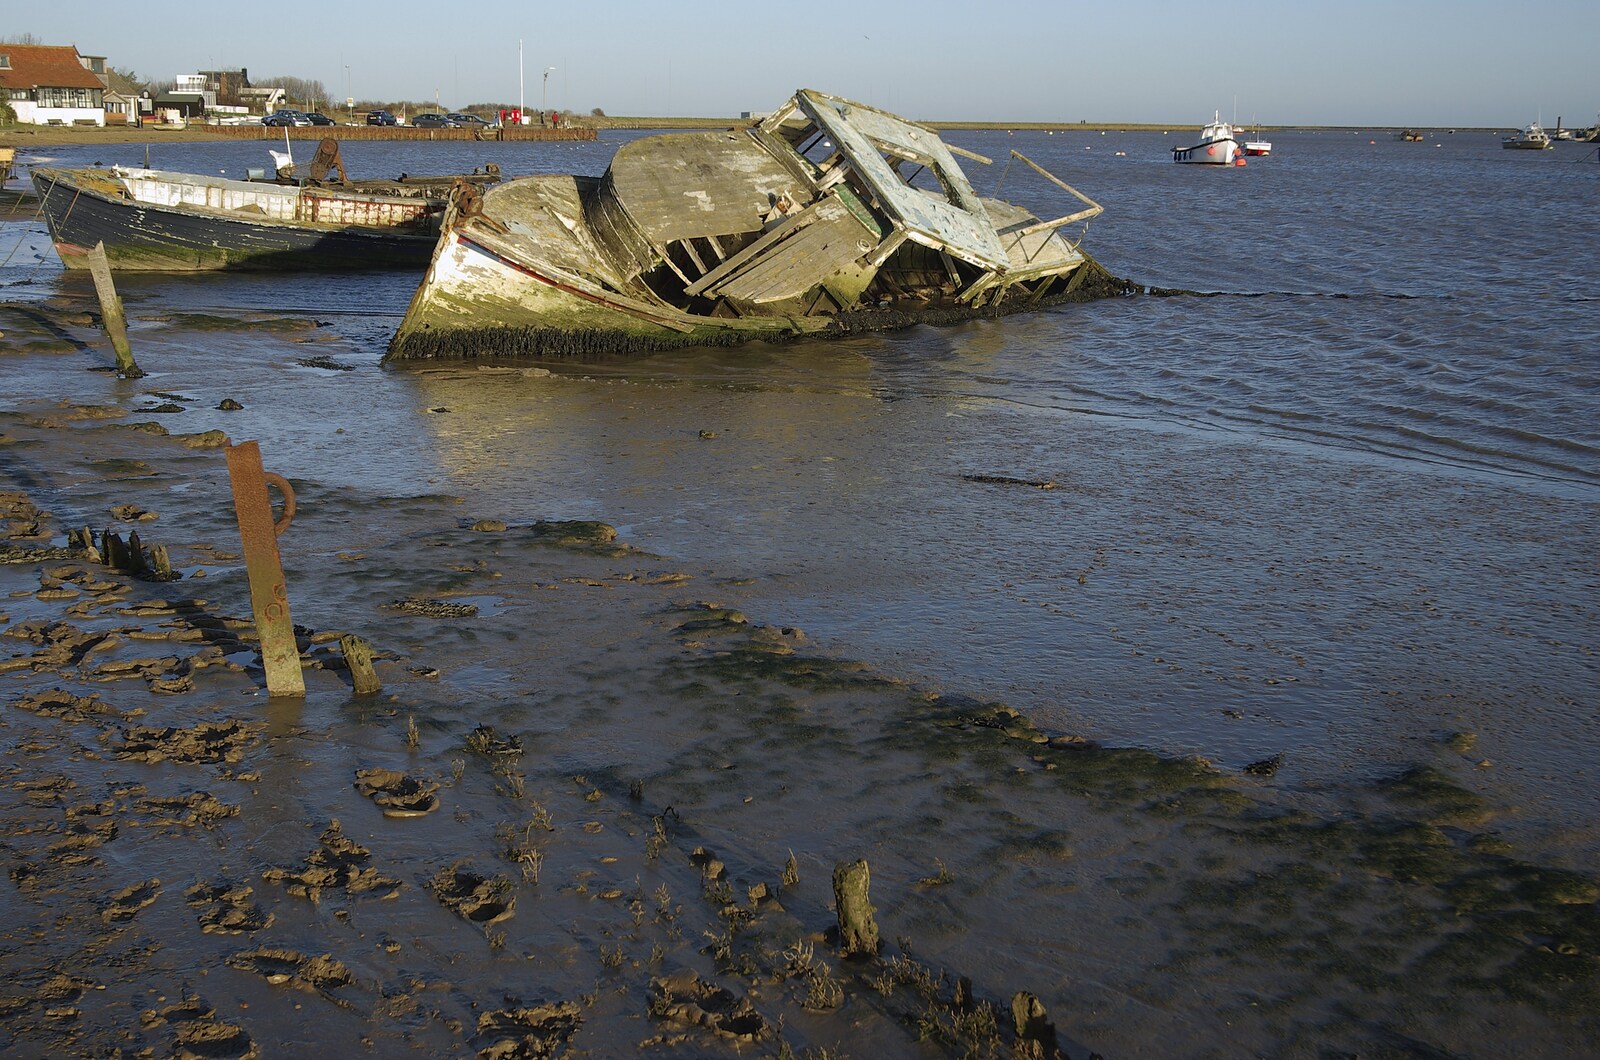 A wrecked boat, sucked into the mud from A Post-Christmas Trip to Orford, Suffolk - 29th December 2007